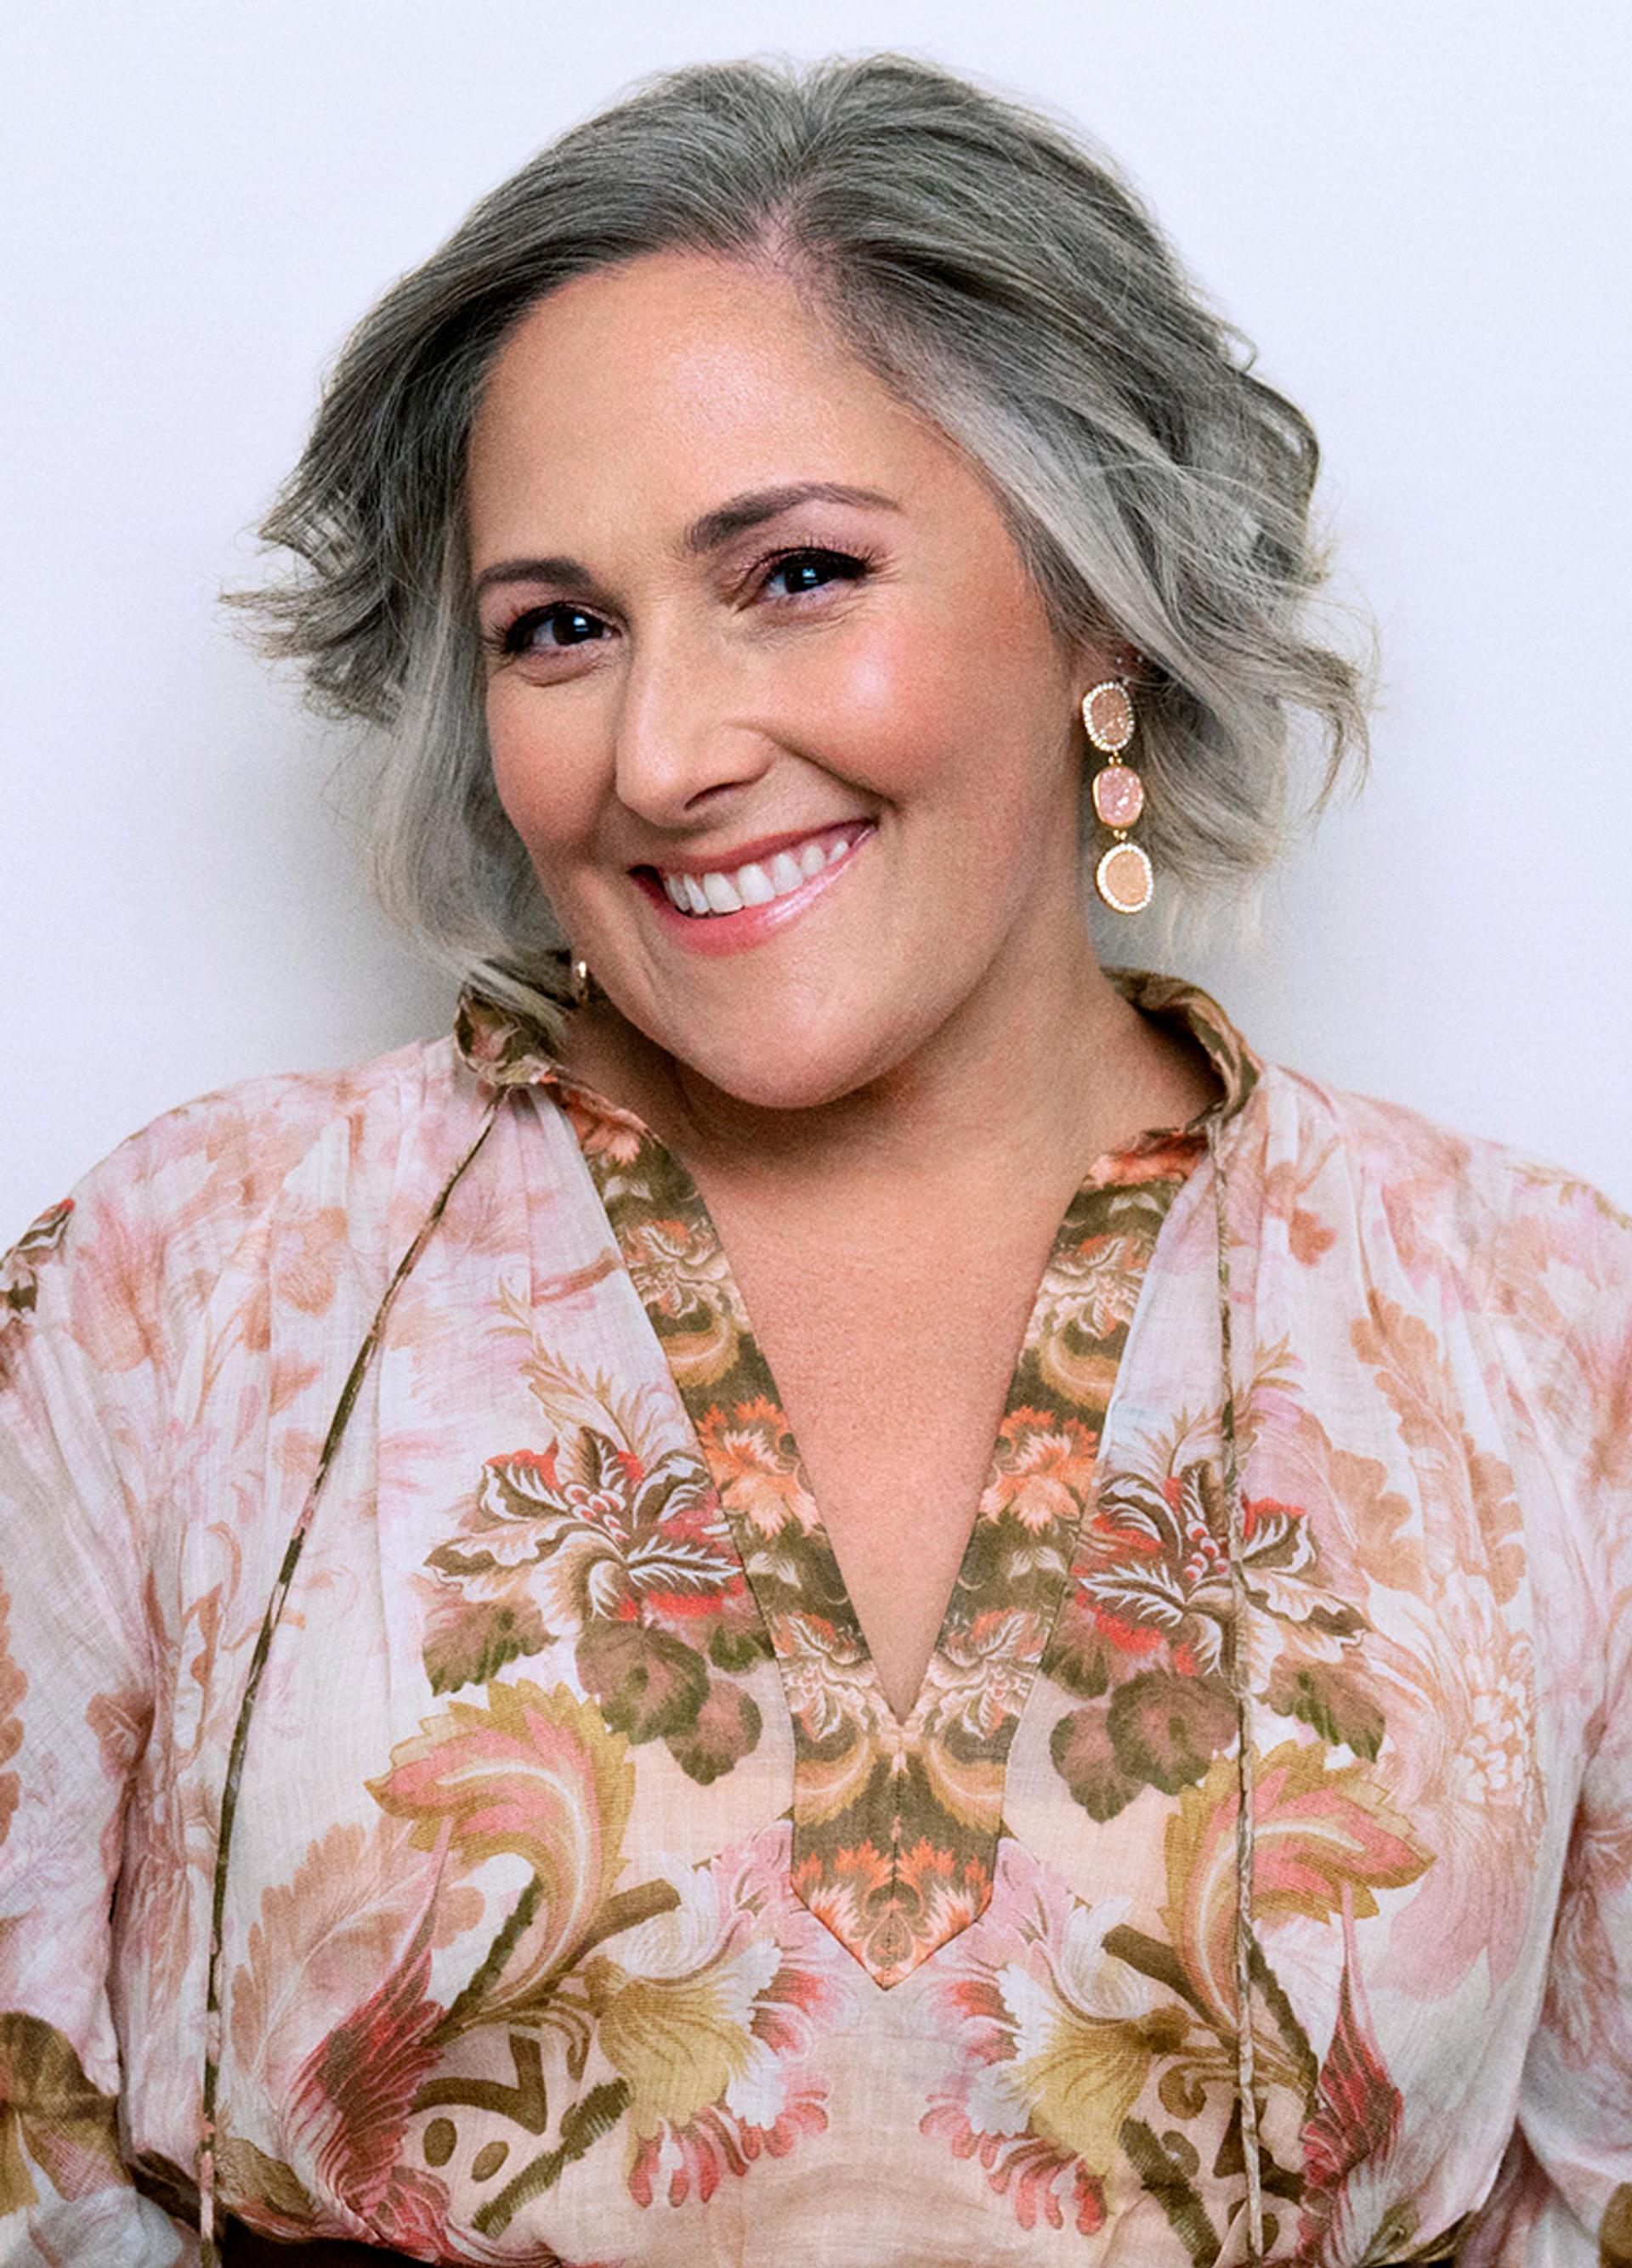 Ricki lake smiling directly at camera wearing a pink floral blouse and long earrings